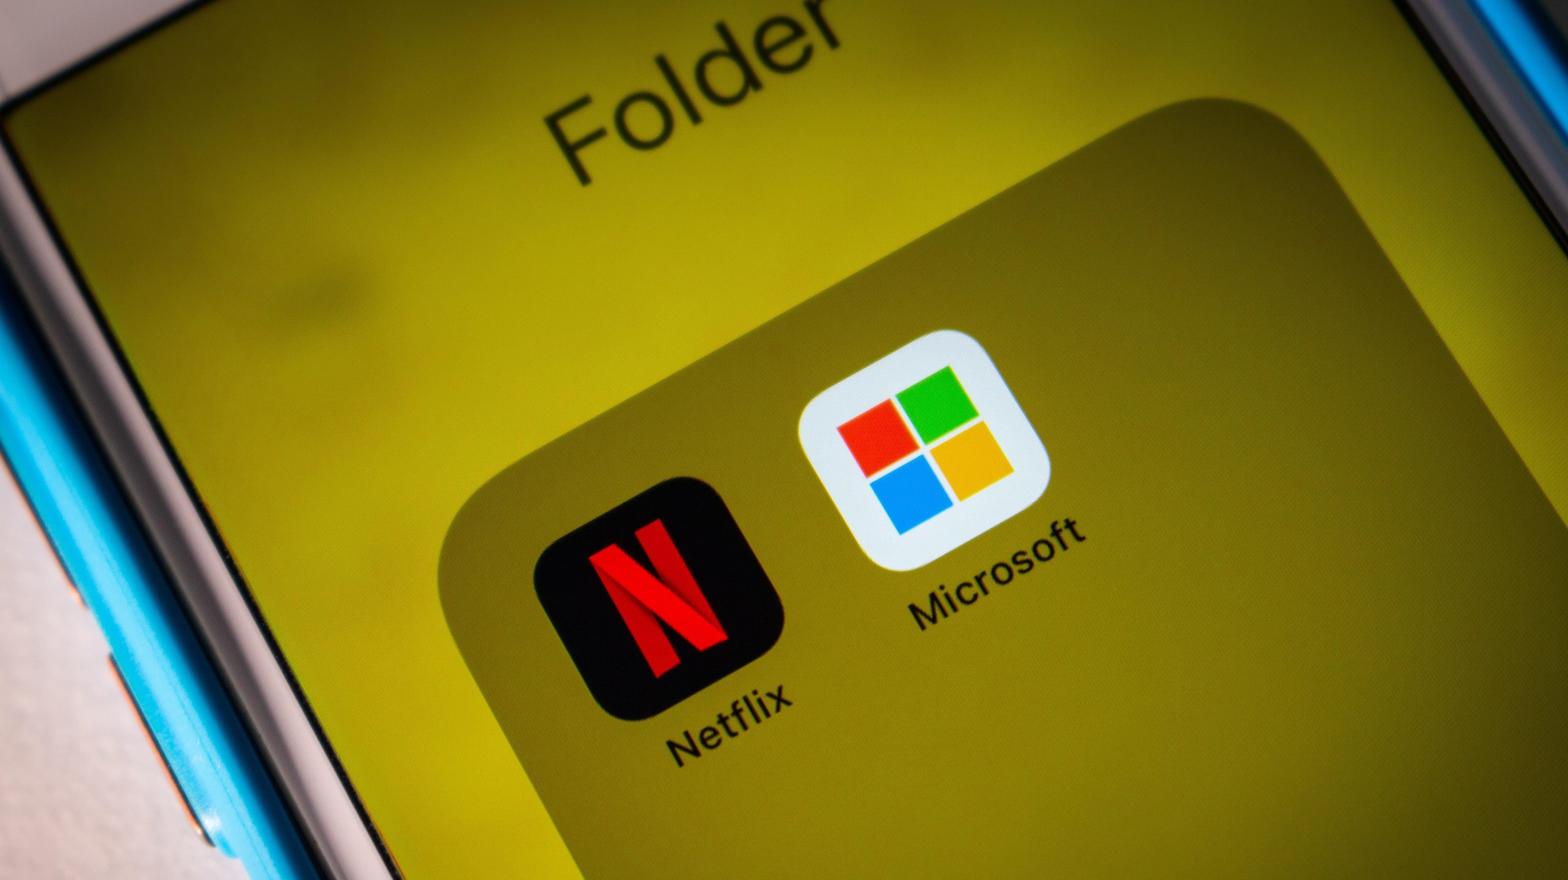 Netflix announced earlier this year they were teaming up with Microsoft to craft its ad-based subscription tier. (Photo: Koshiro K, Shutterstock)